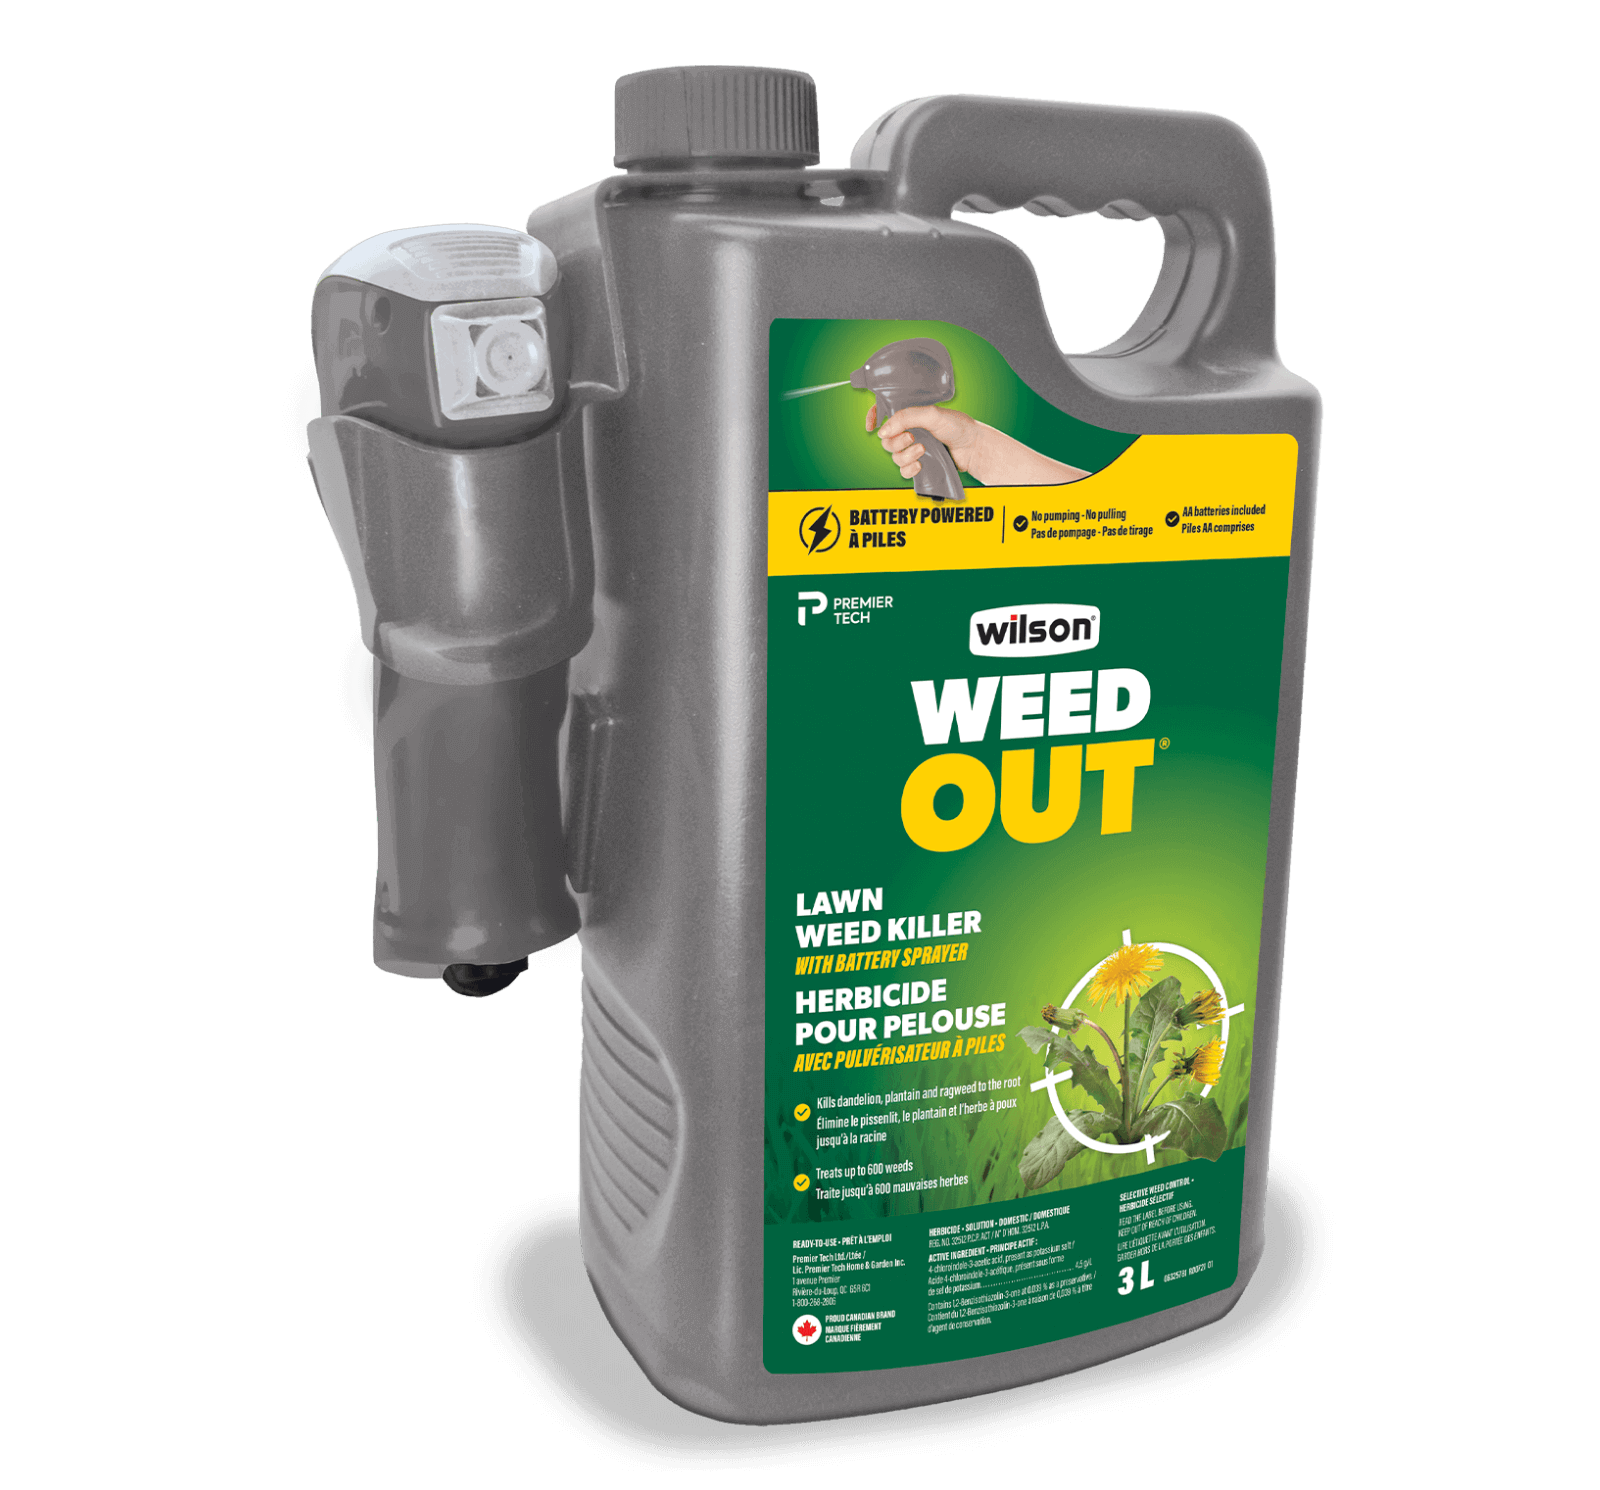 Easy to use Wilson WEED OUT Lawn Weed Killer with Battery Sprayer